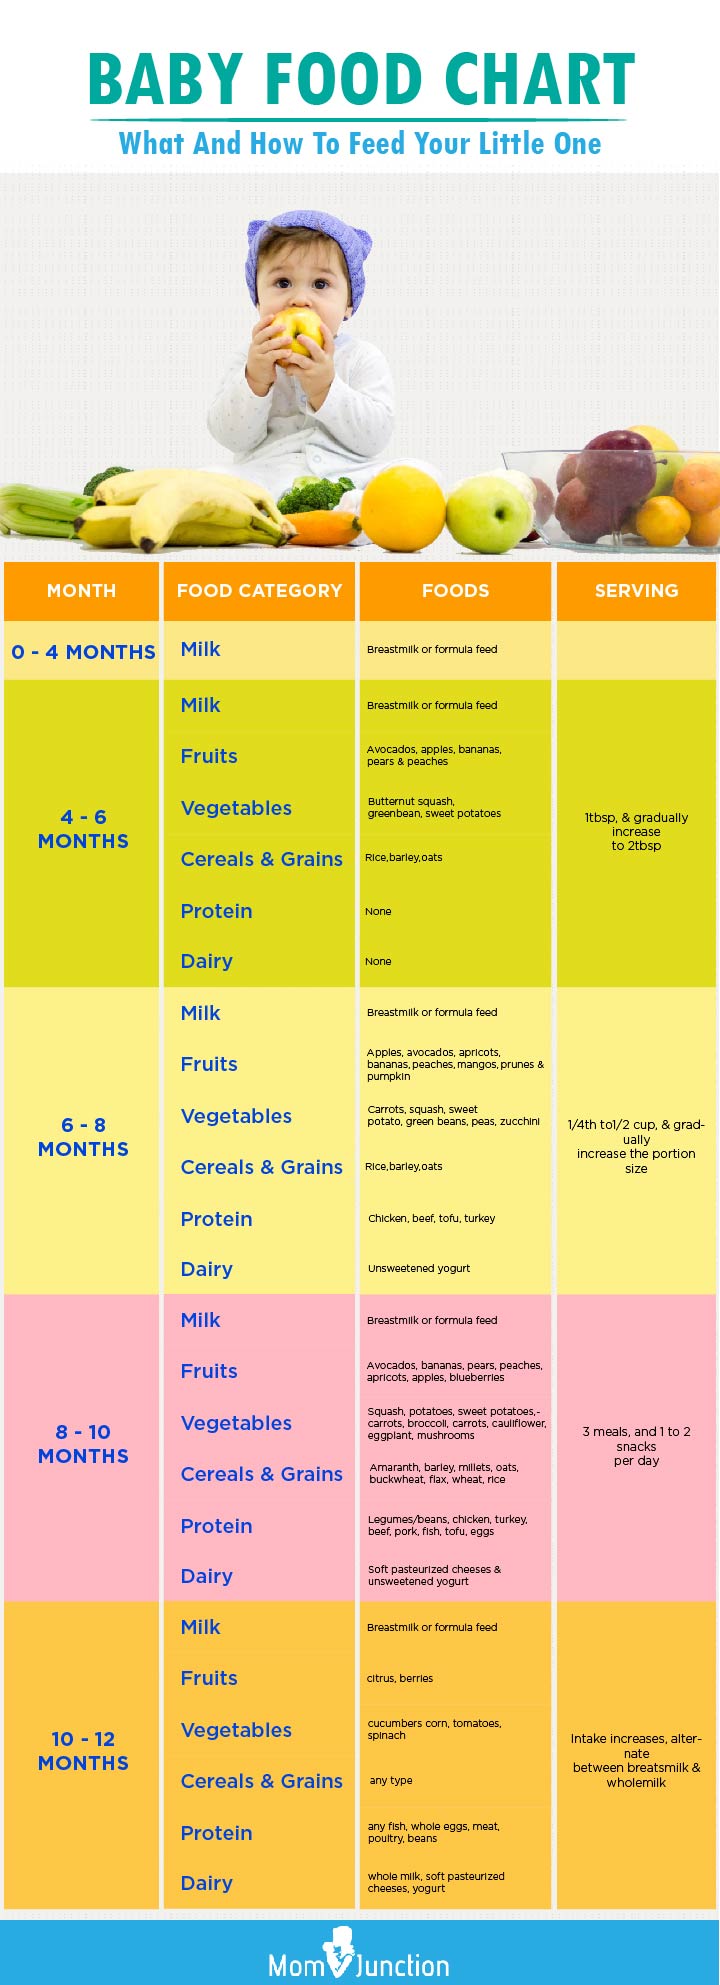 Baby Food Chart: What And How To Feed Your Little One